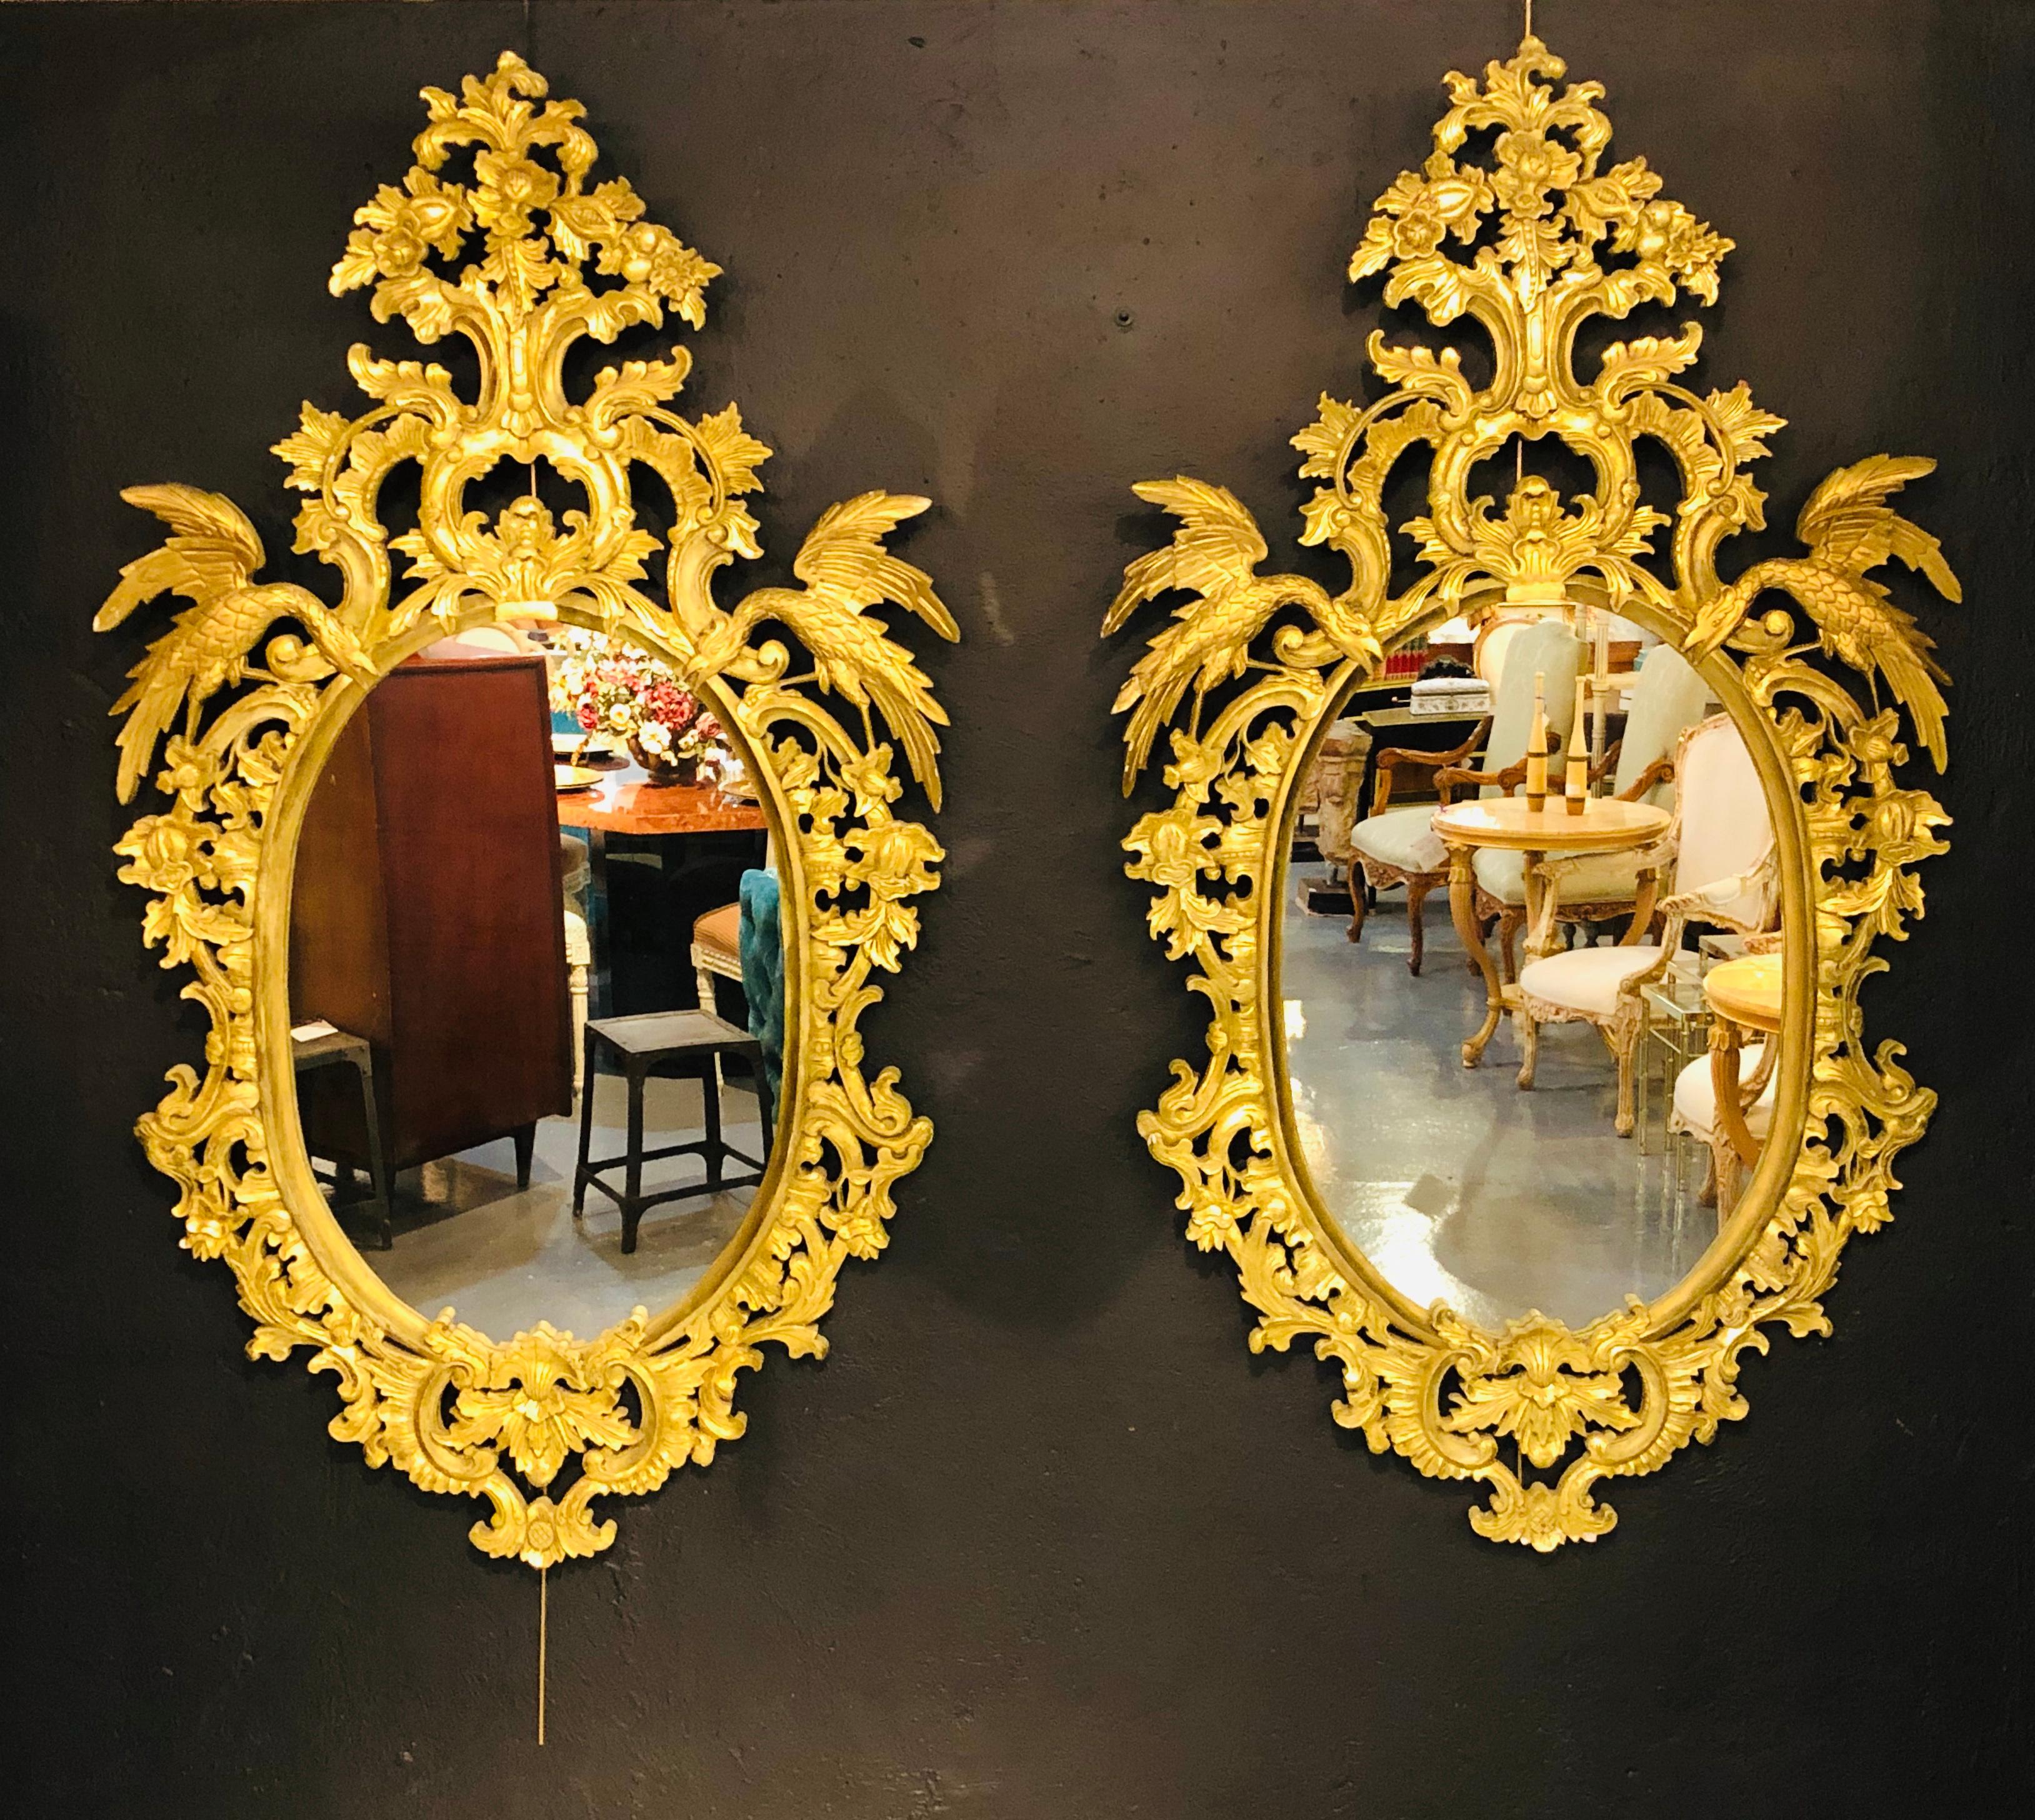 Pair of Chippendale style elaborate giltwood wall or console mirrors. The pair oval in form with a clean center mirror flanked by a finely carved carved frame of roses, floral design and scroll having full bodied winged birds perched on each side of